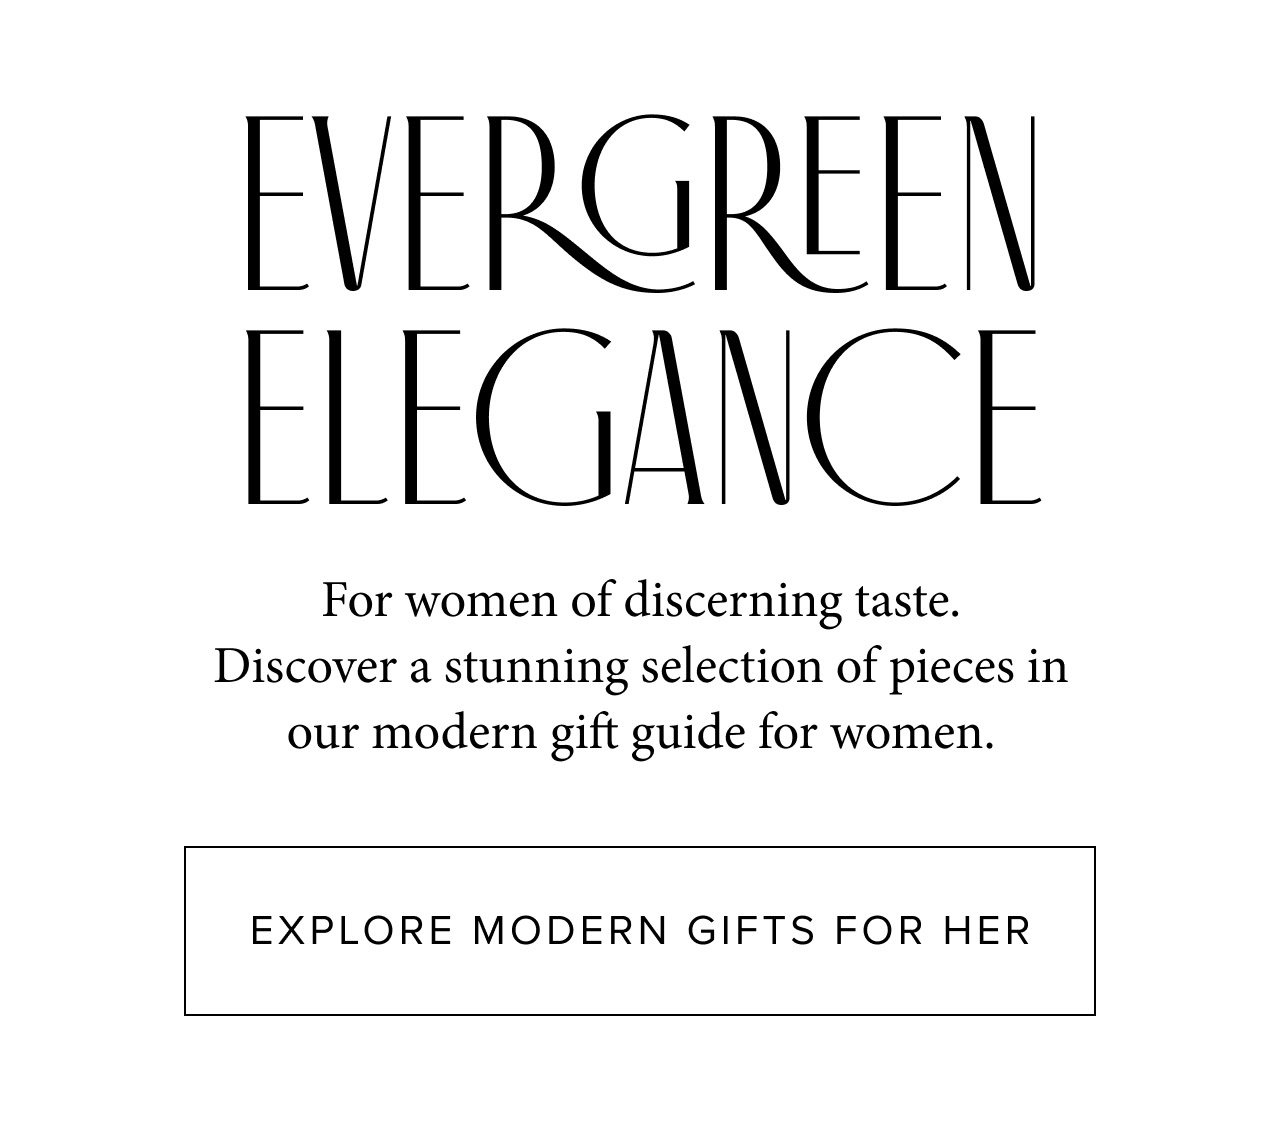 Evergreen Elegance. For women of discerning taste. Discover a stunning selection of pieces in our modern gift guide for women.